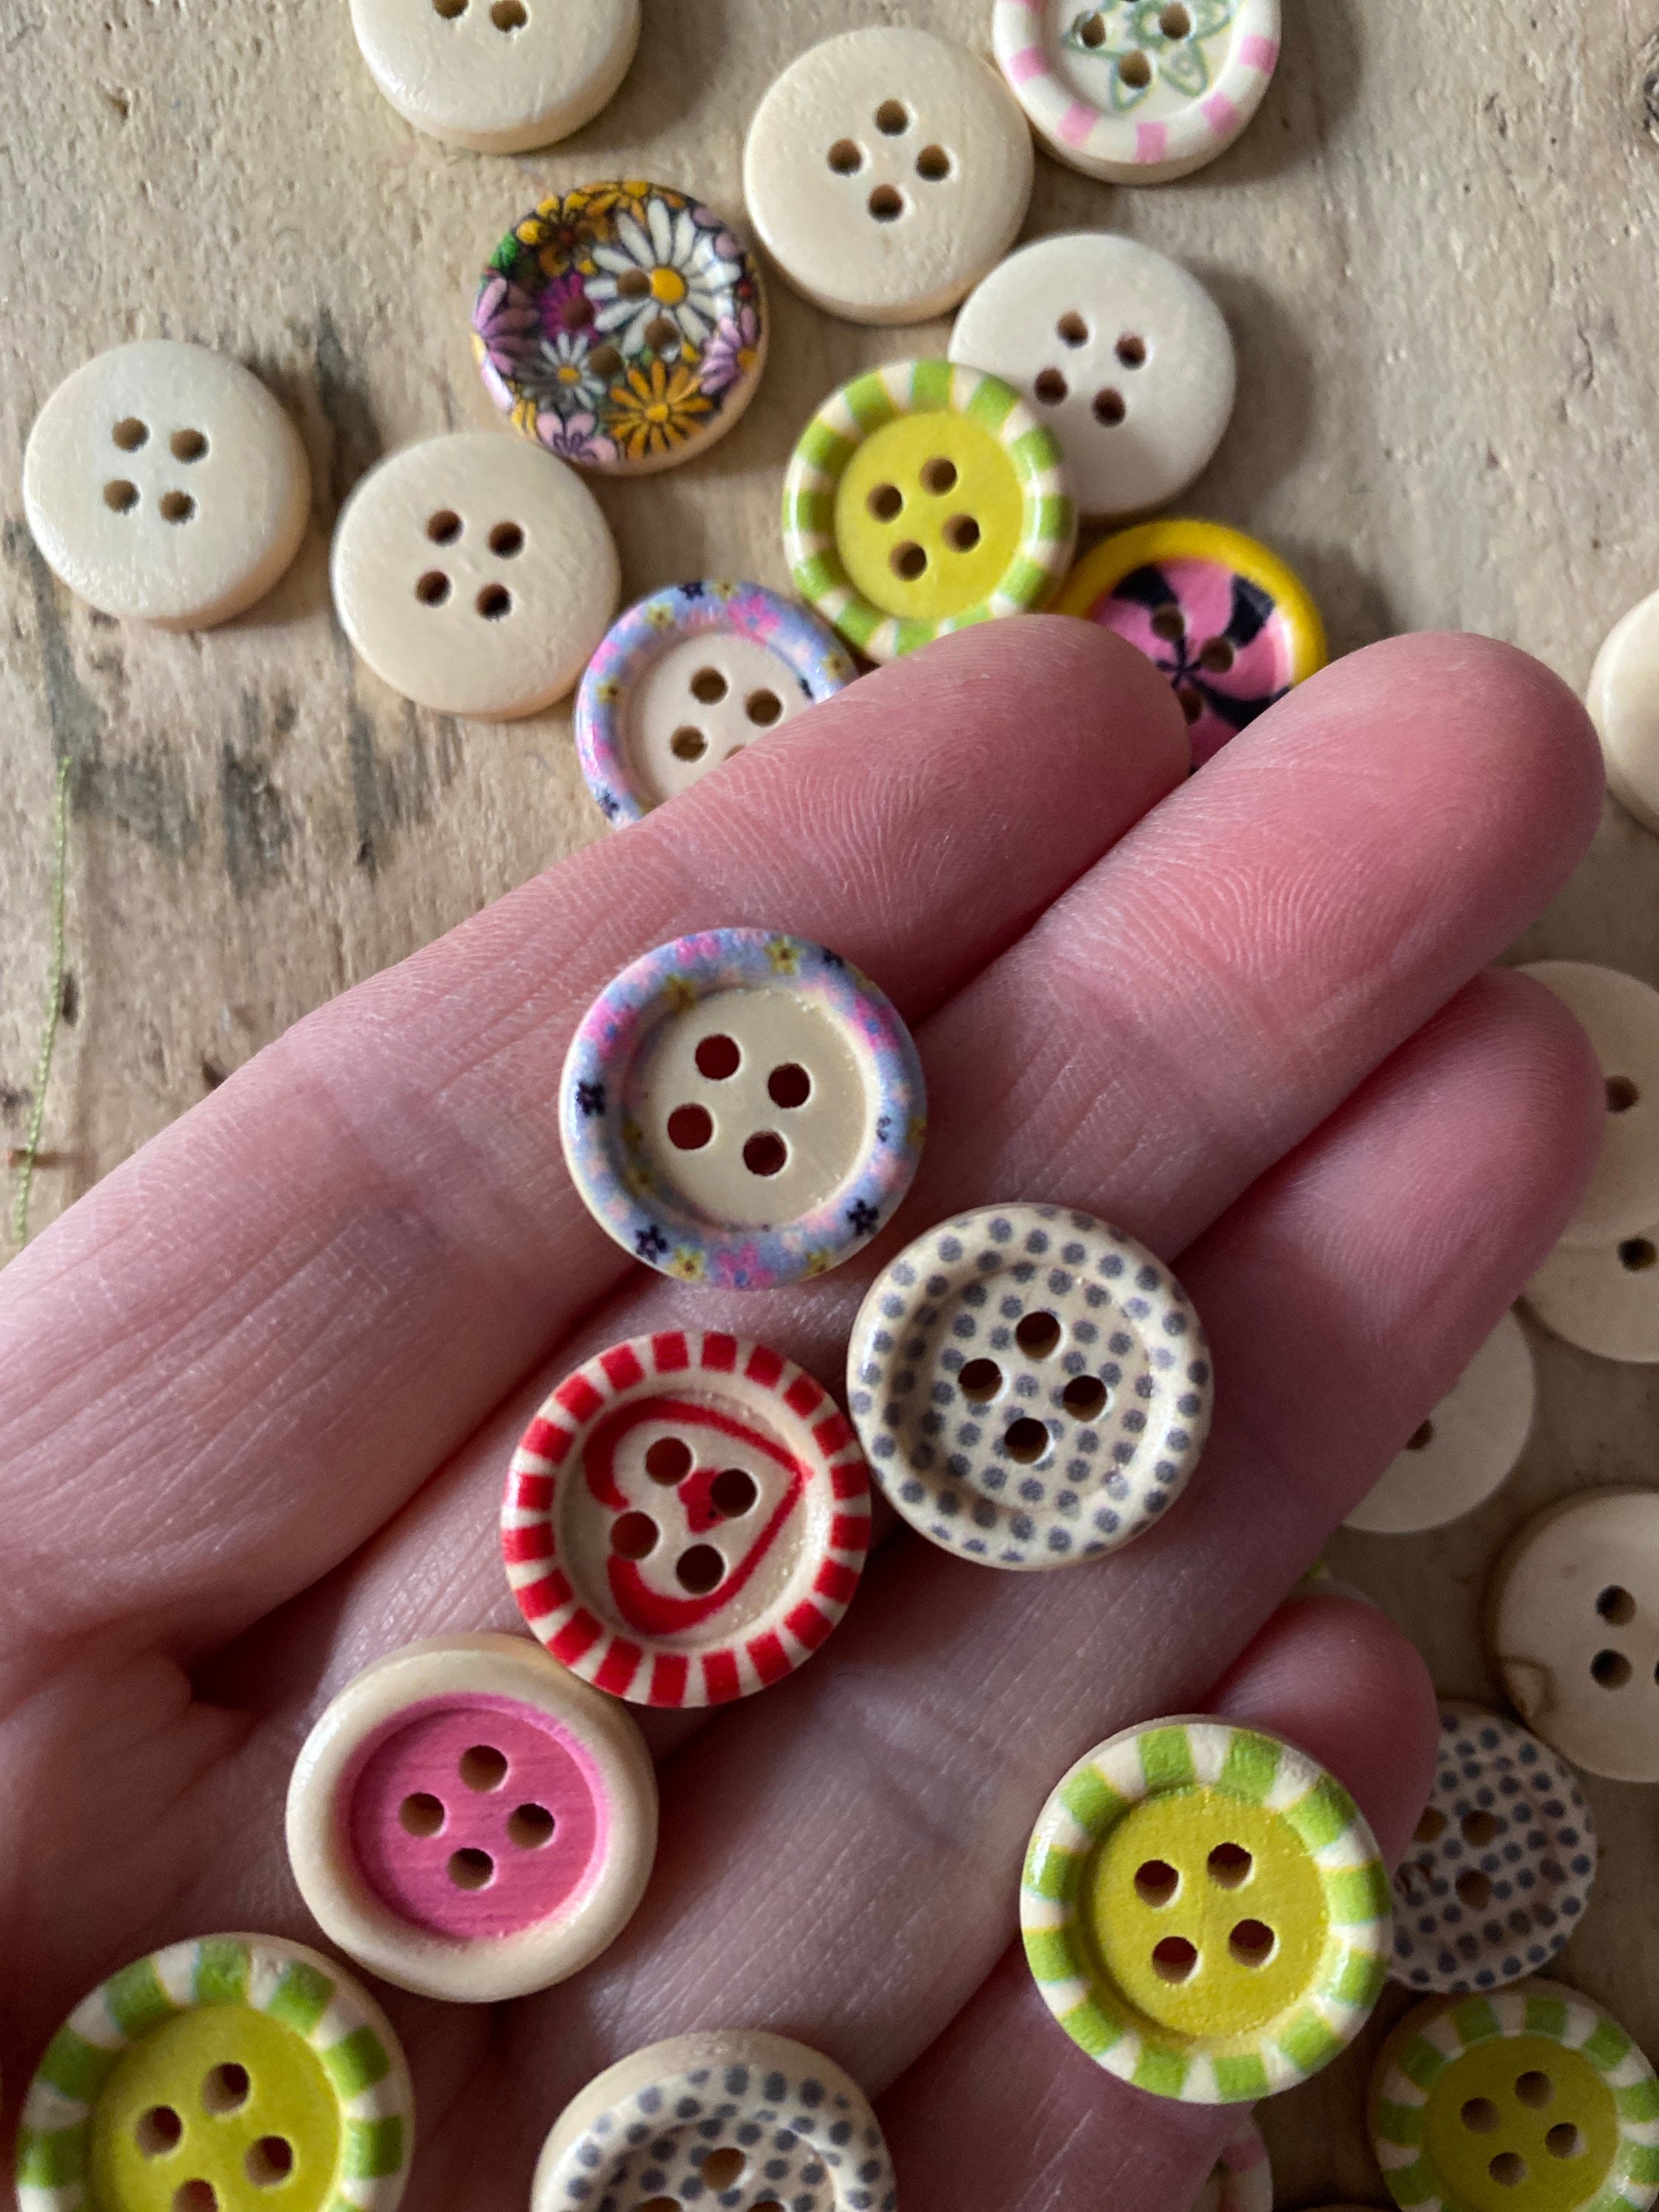 Handmade With Love Buttons, 25mm Wood Buttons, 25mm Handmade Buttons, 1  Inch Round Wooden Buttons 